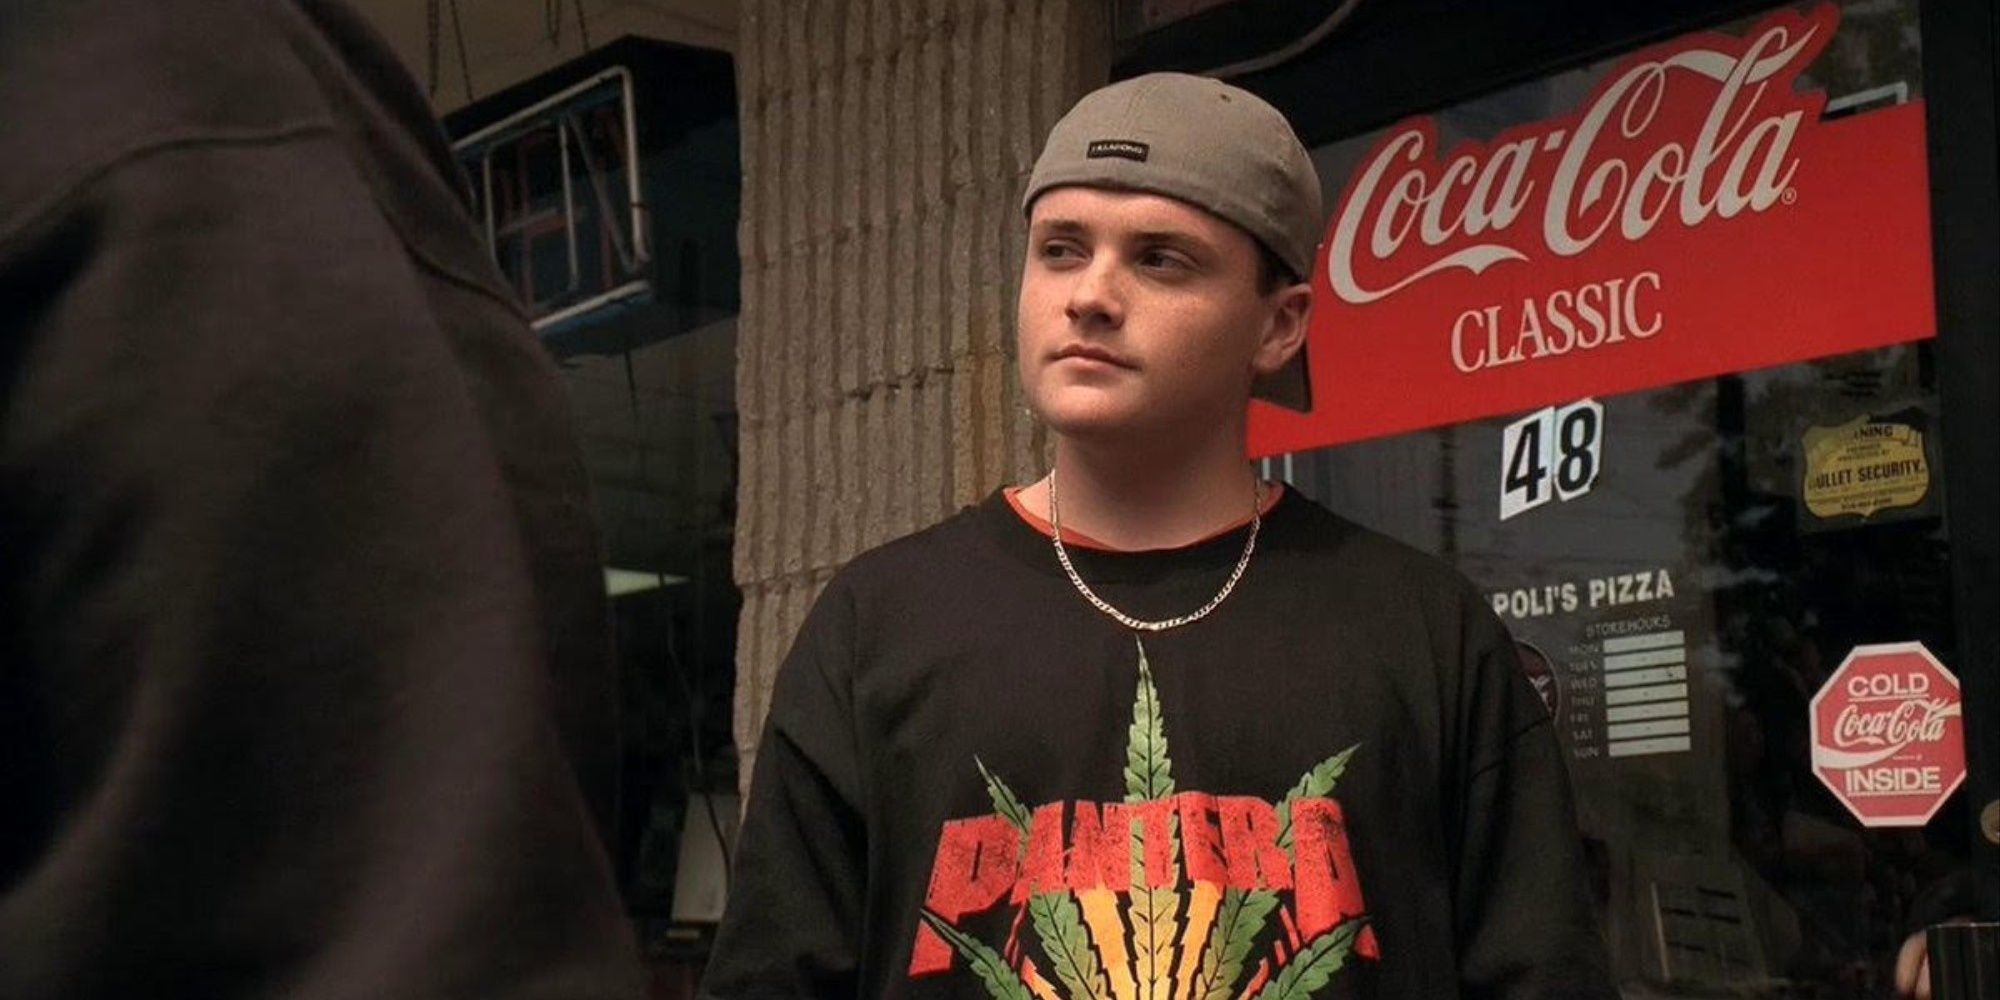 AJ Soprano meets his friends to plan a night out in the Sopranos standing in front of a Coke machine.